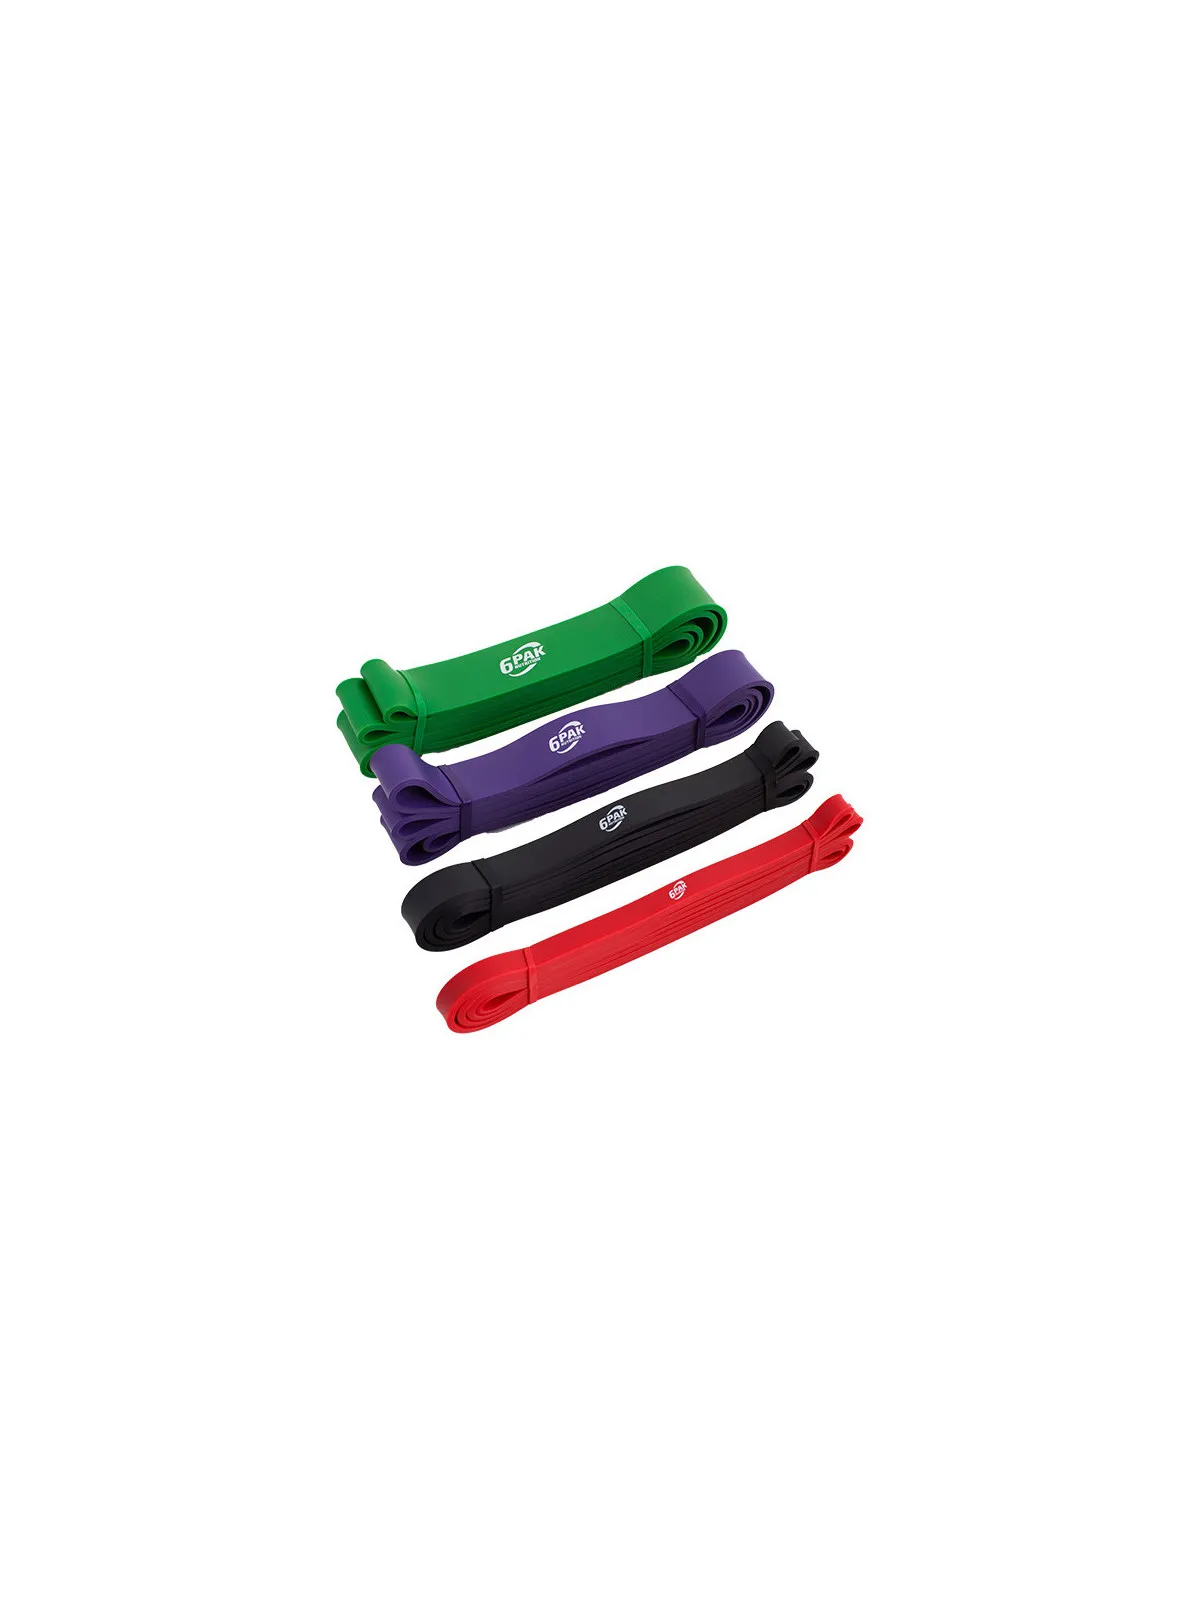 Zestaw gum oporowych - PULL UP BANDS SET - LATEX 02 Multicolor